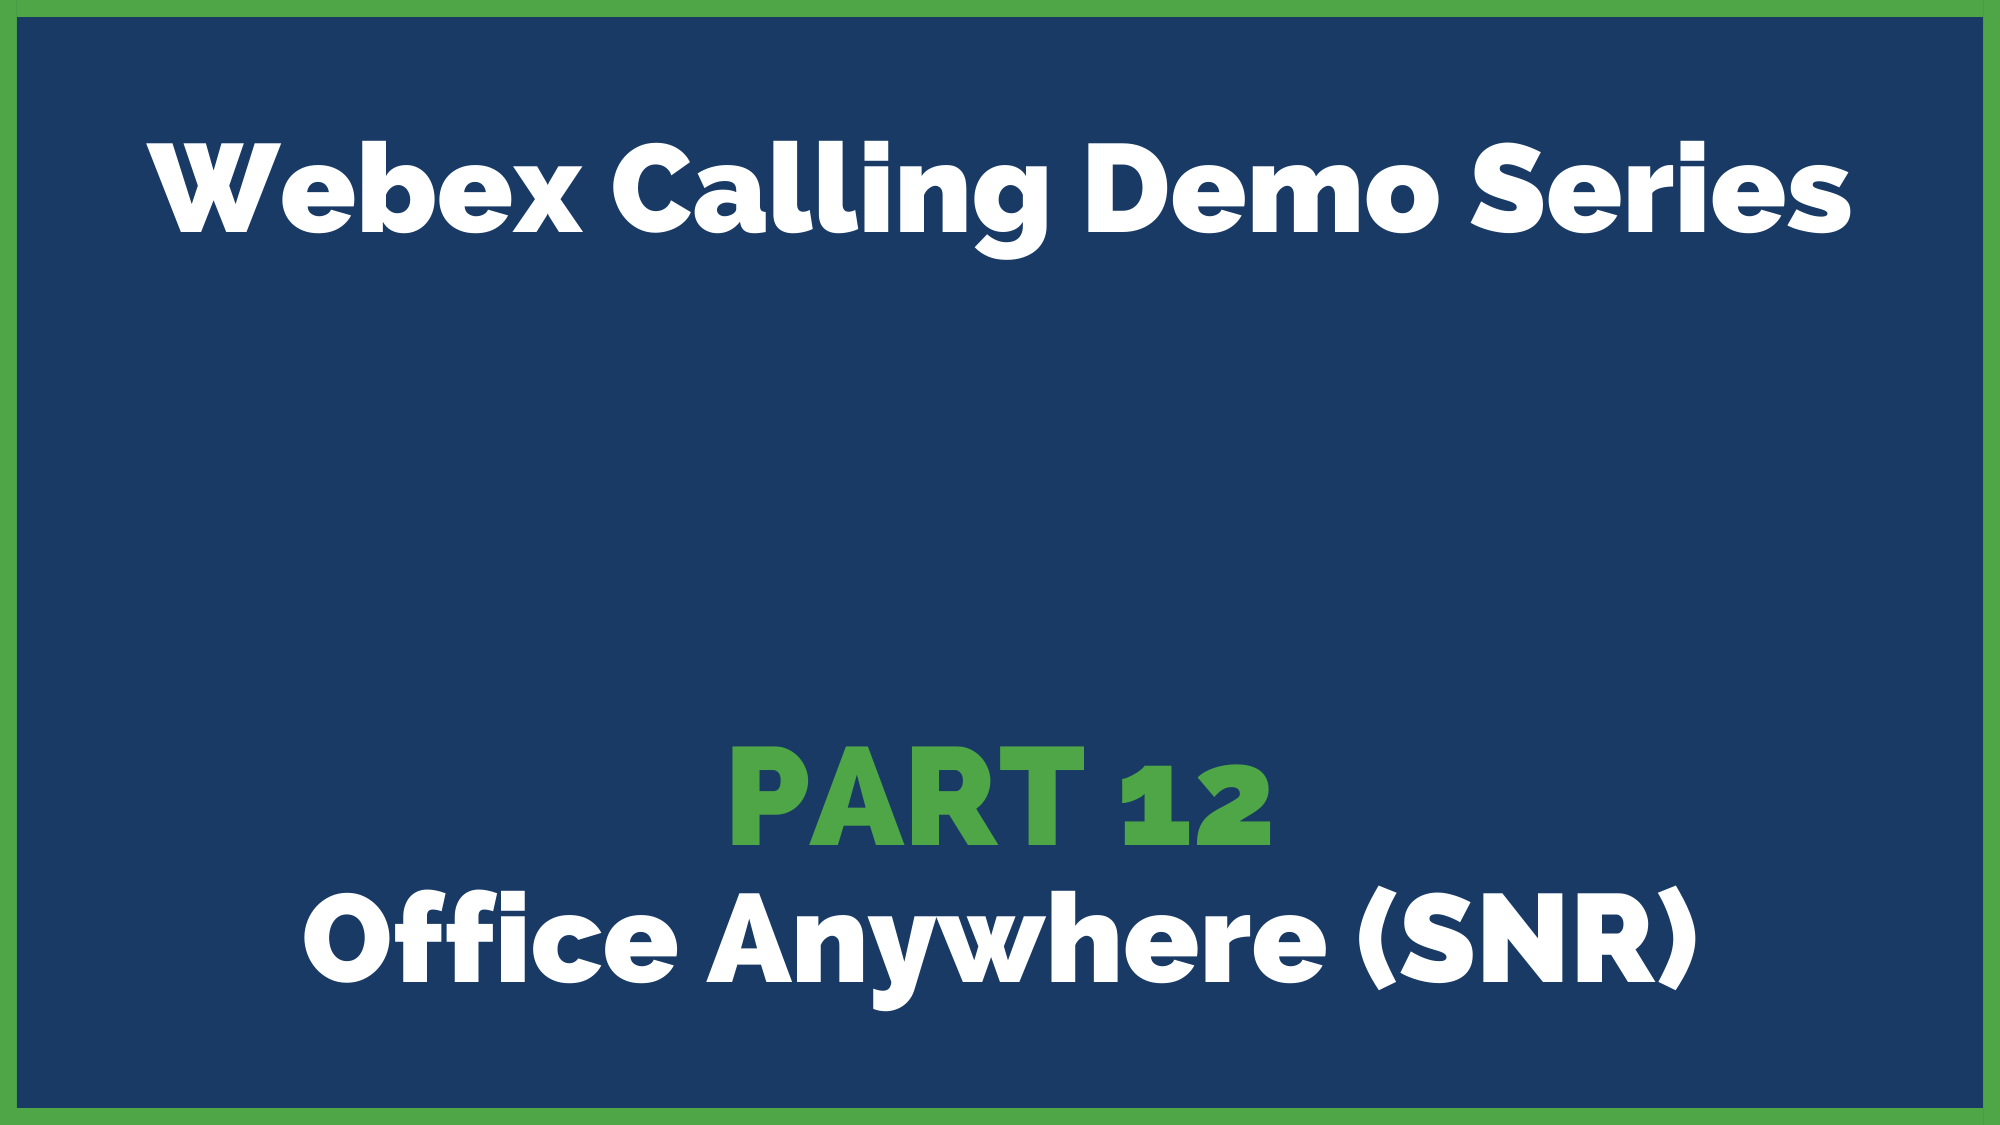 2022 Webex Calling Deme Series Part 12: Office Anywhere (SNR)